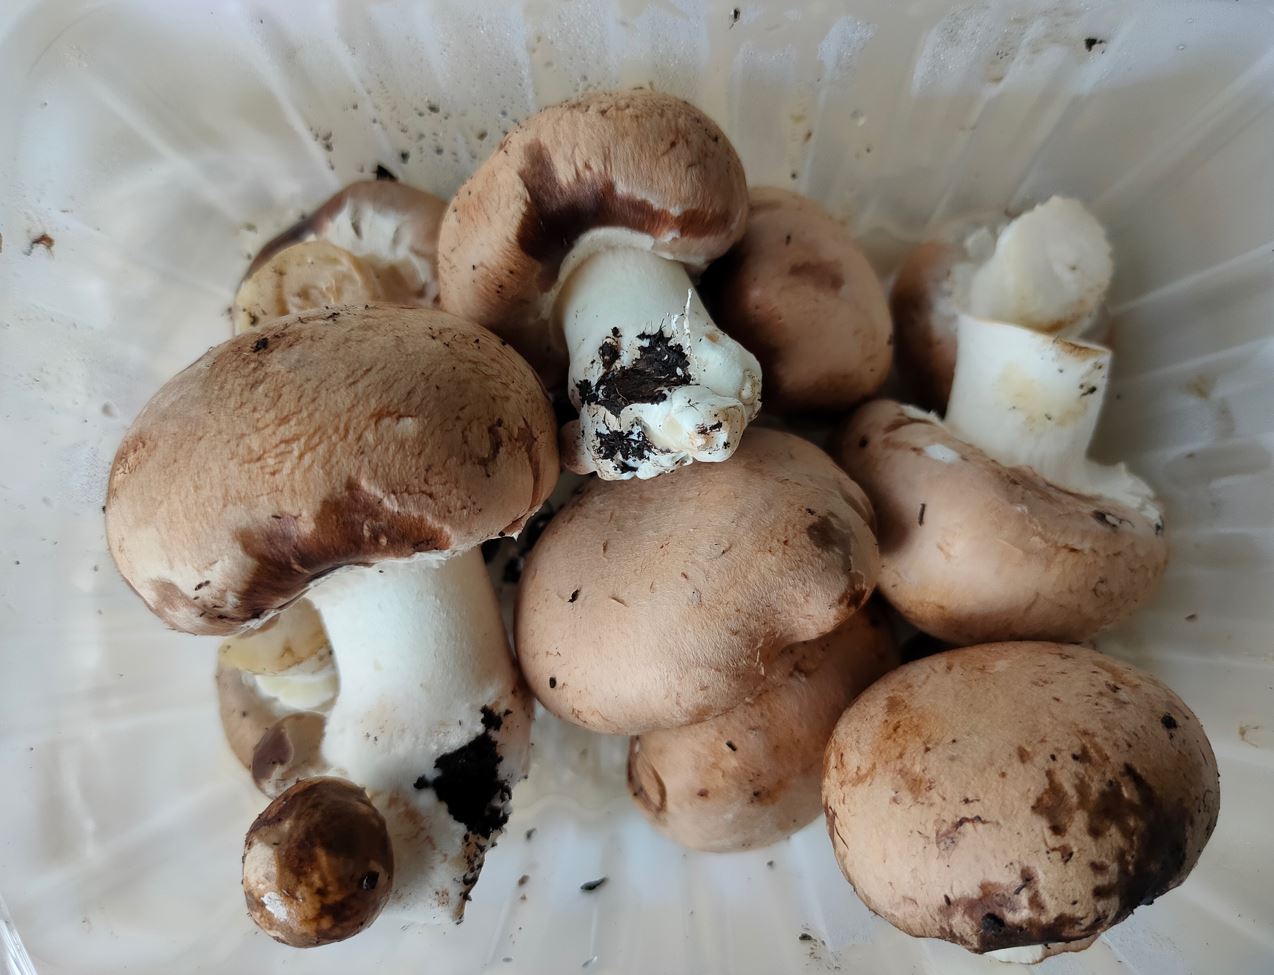 Brown mushrooms with P. tolaasii infection